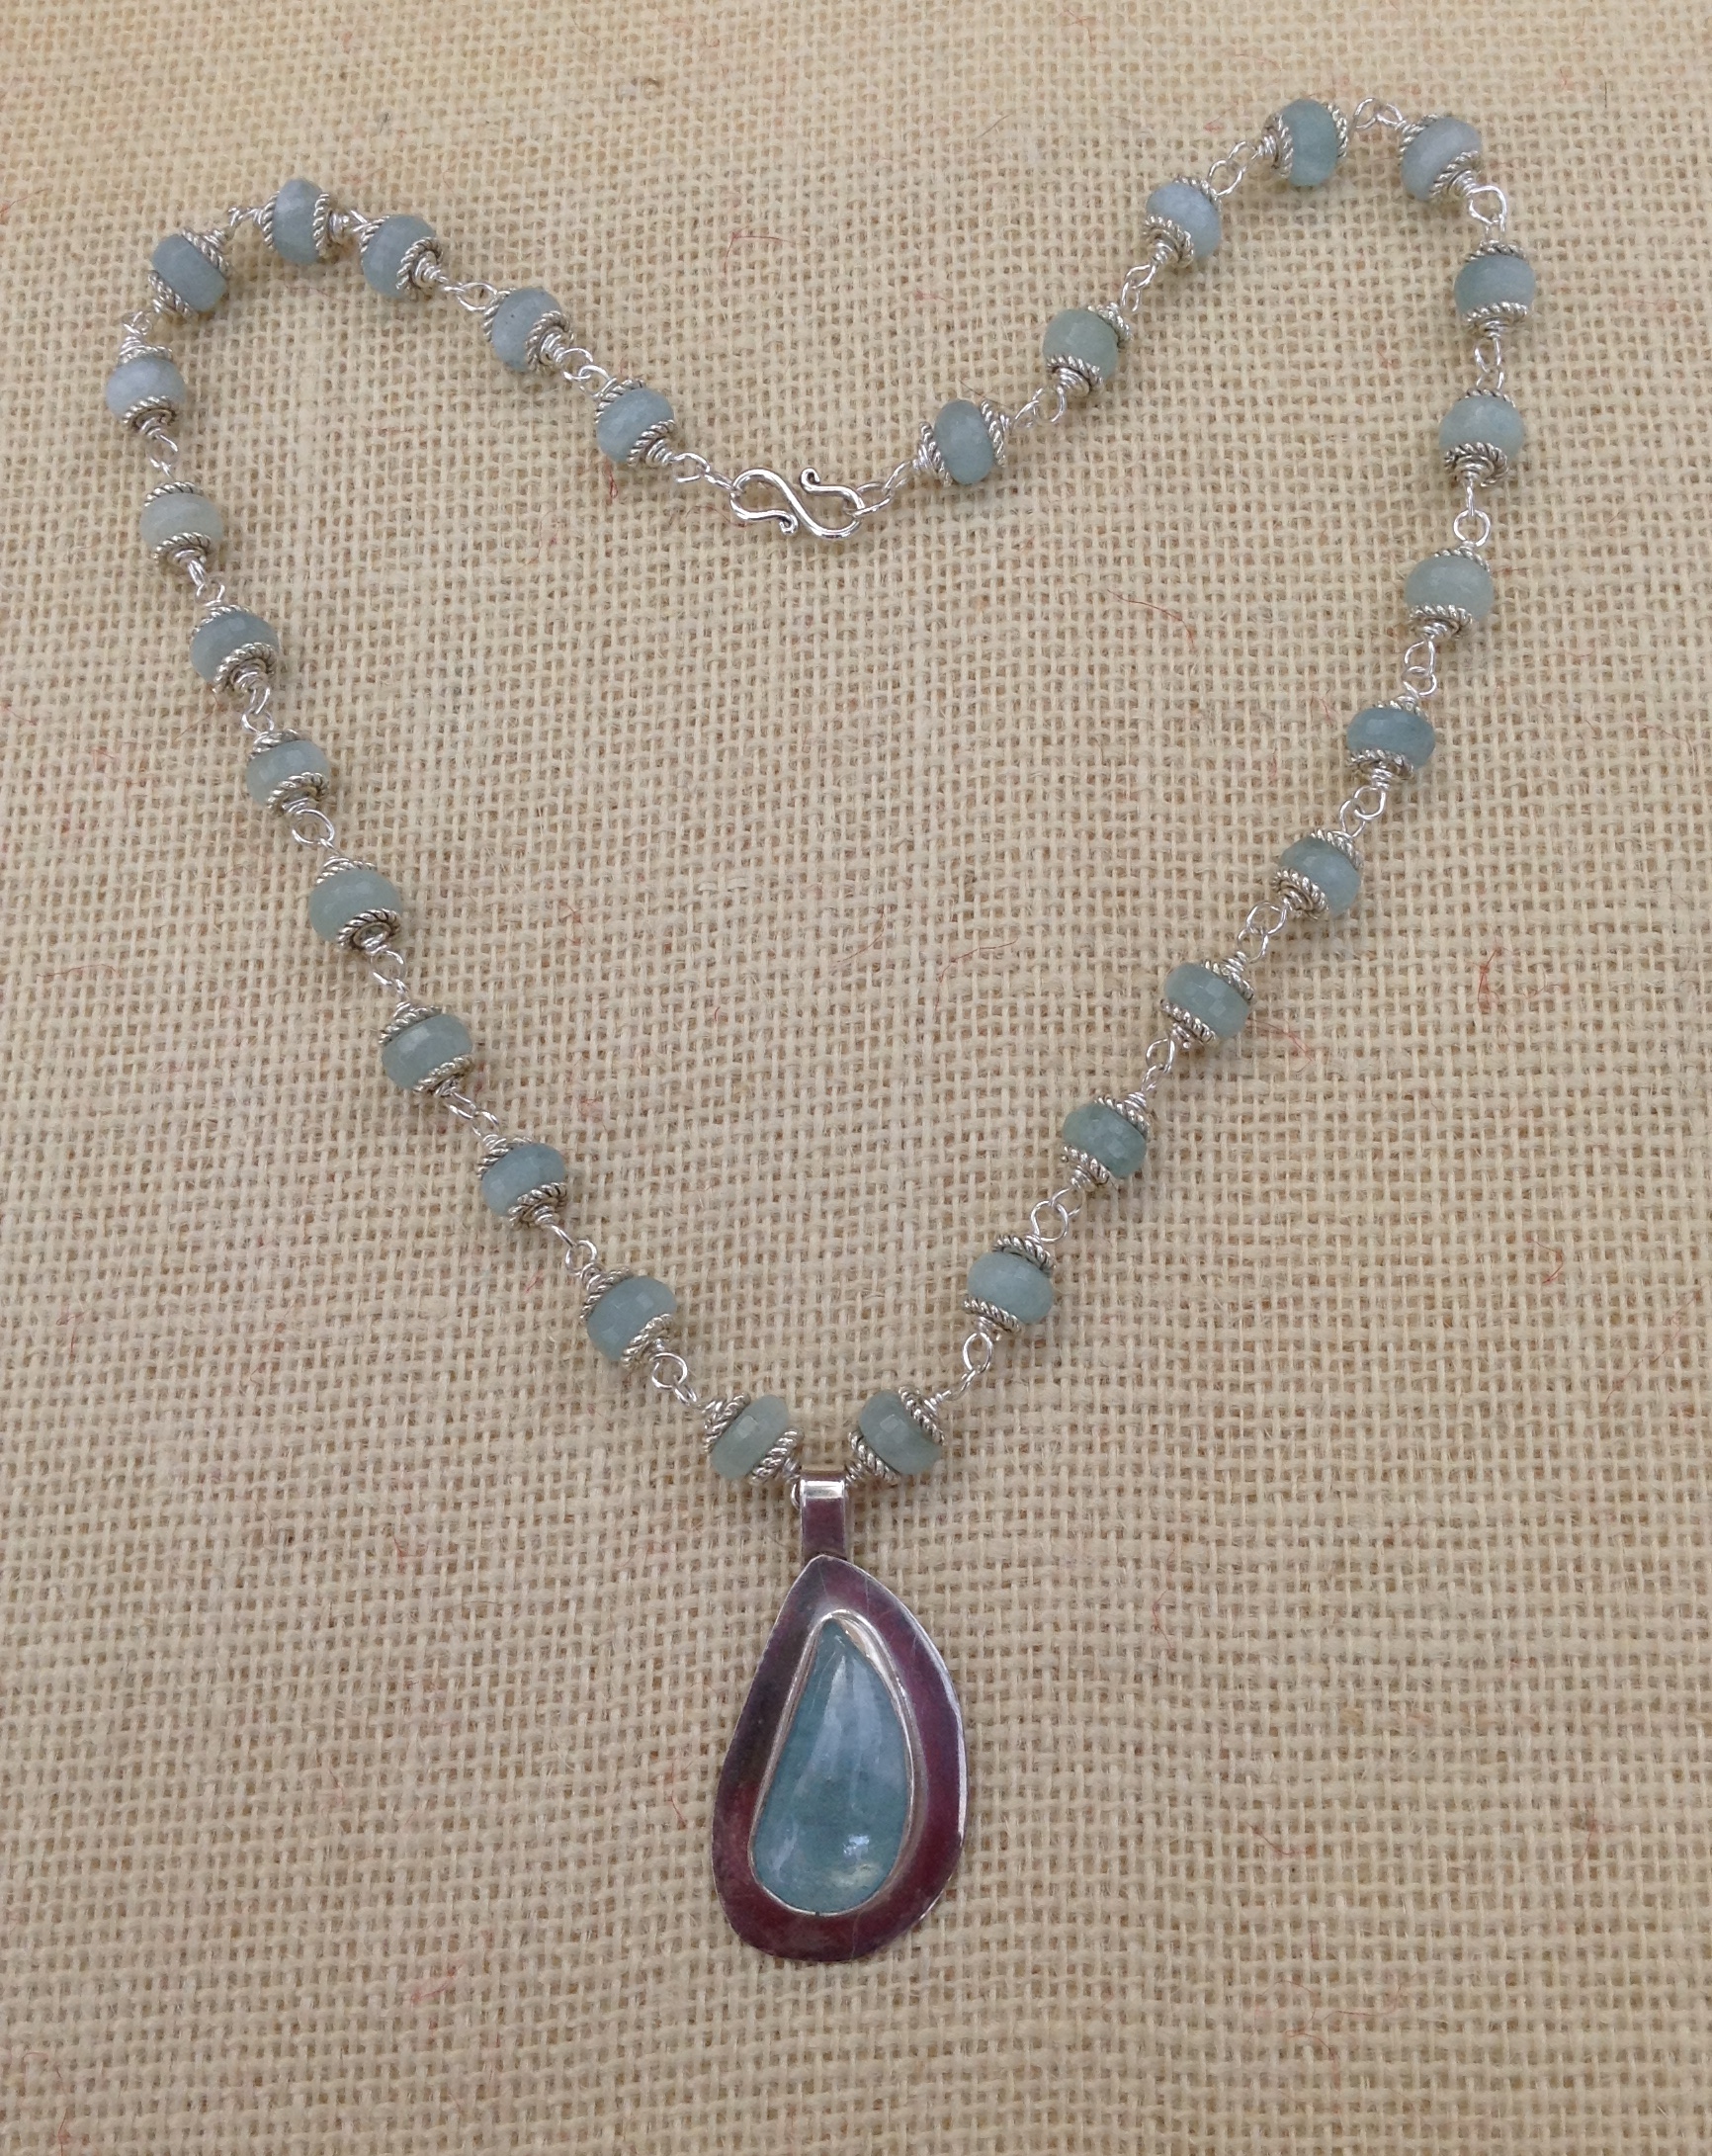 Aquamarine Sterling Silver Necklace and Pendant